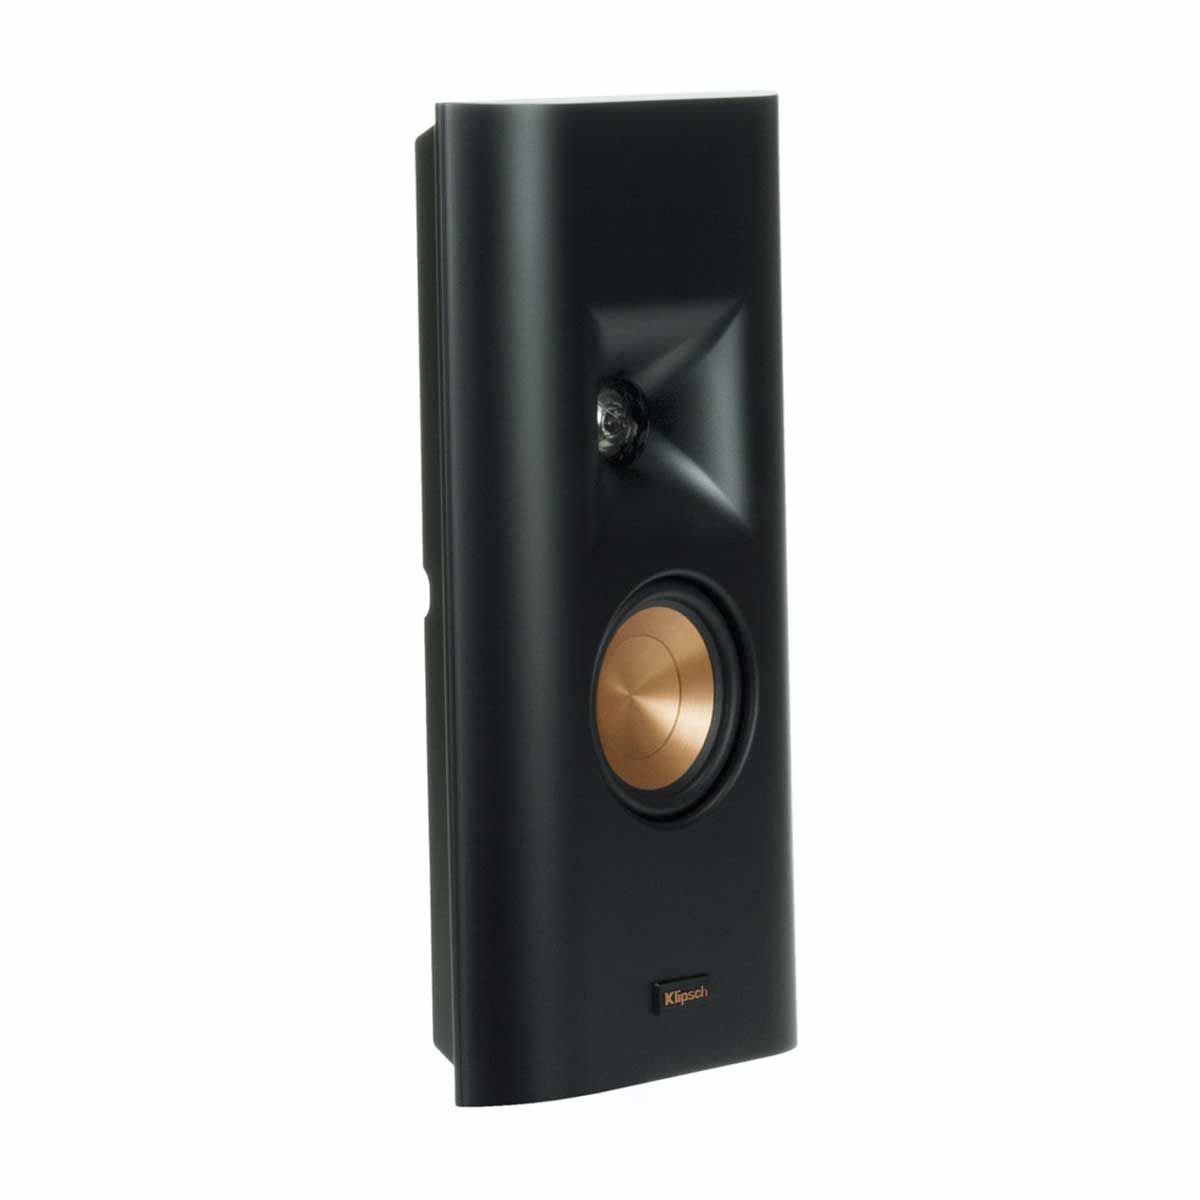 Klipsch RP-140D On-Wall Speaker without grill